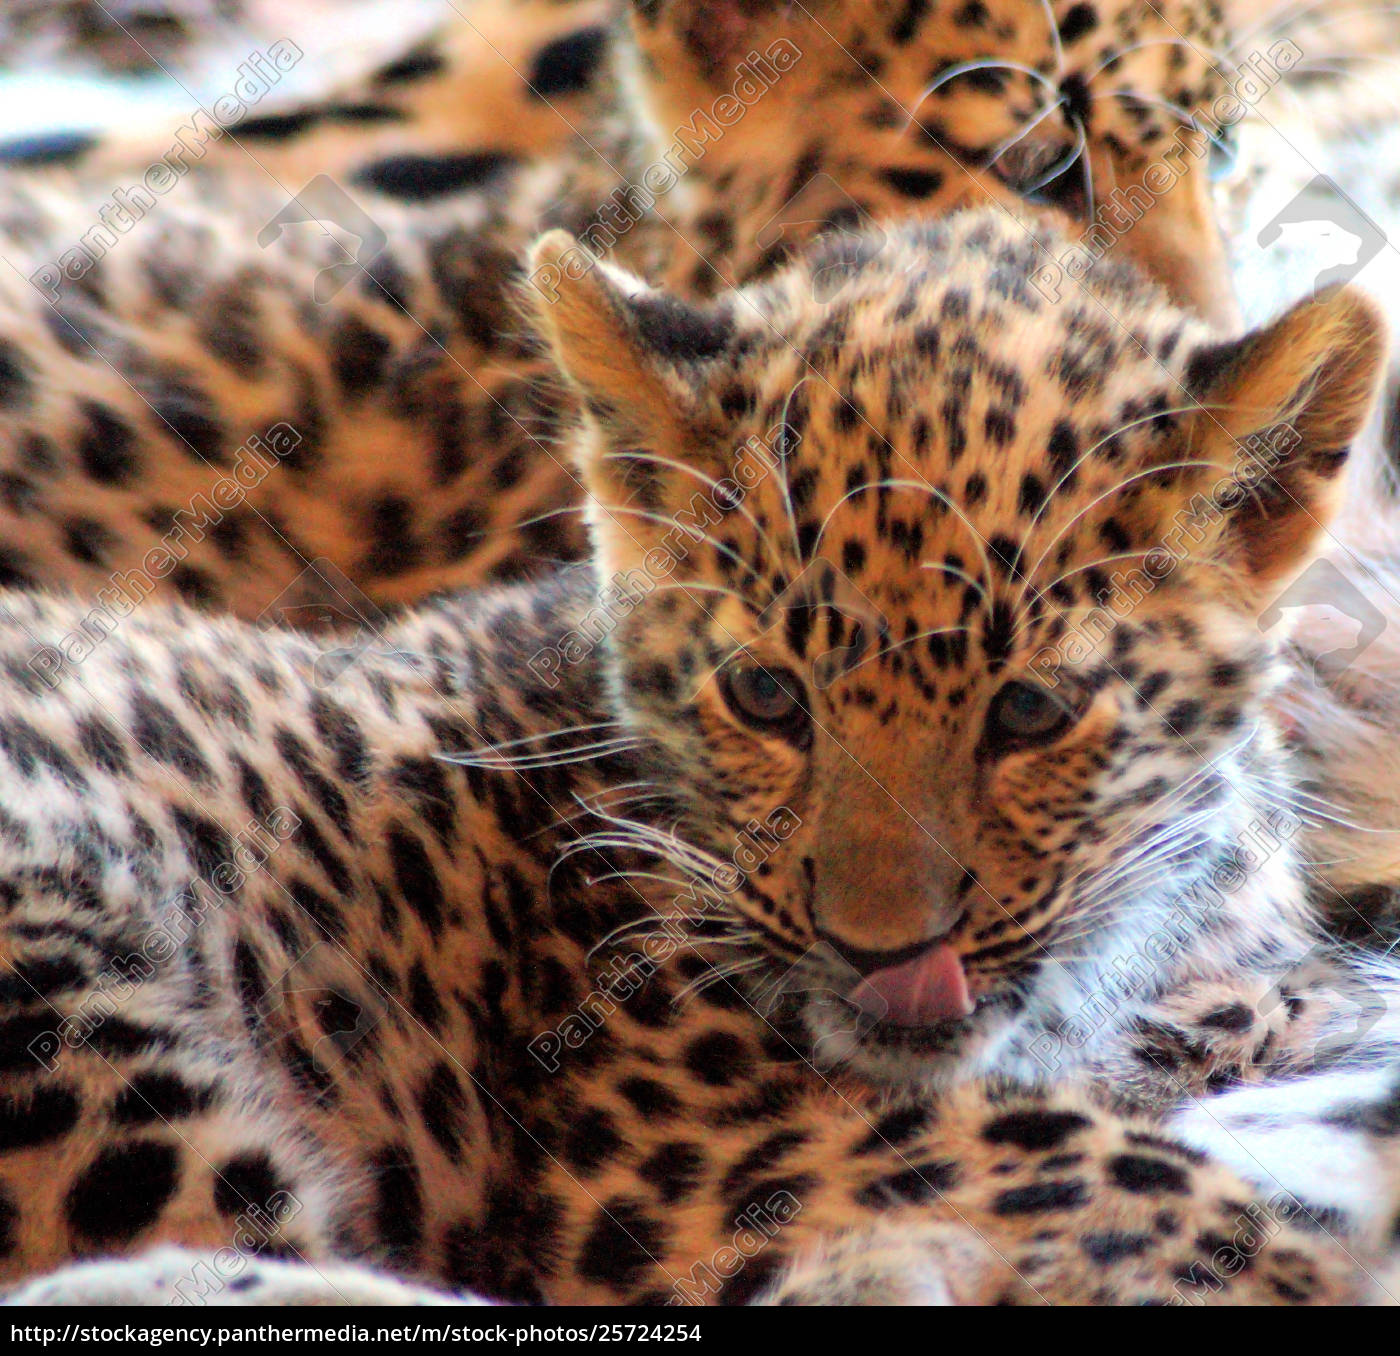 Leopard Baby In The Portrait Rights Managed Image Panthermedia Stock Agency